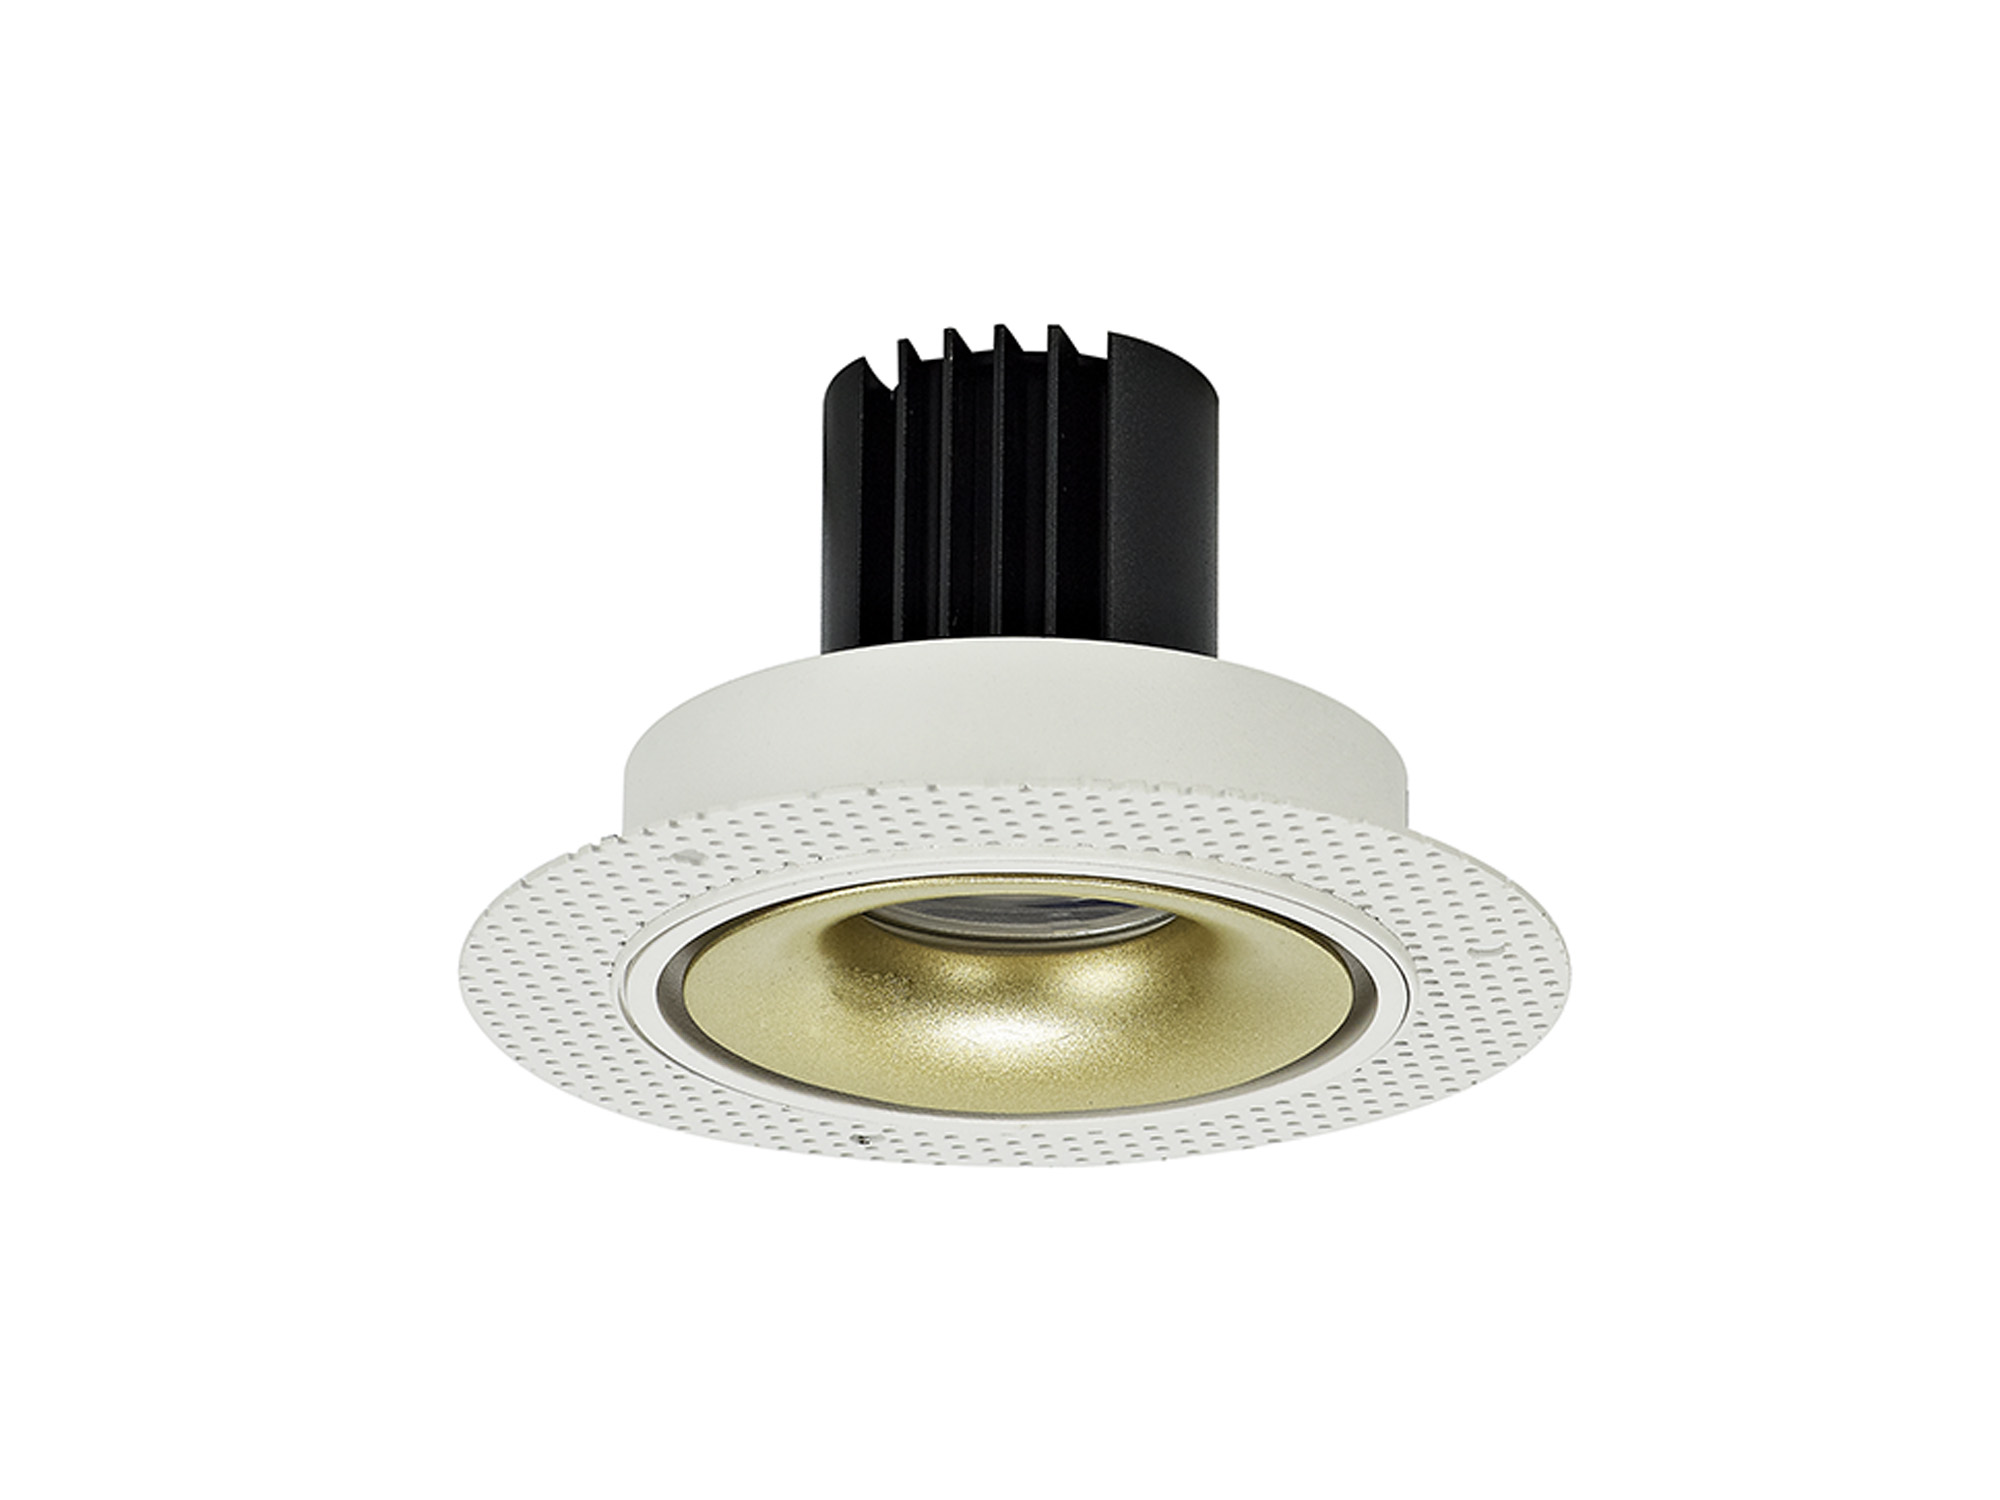 DM202078  Bolor T 9 Tridonic Powered 9W 2700K 770lm 24° CRI>90 LED Engine White/Gold Trimless Fixed Recessed Spotlight, IP20